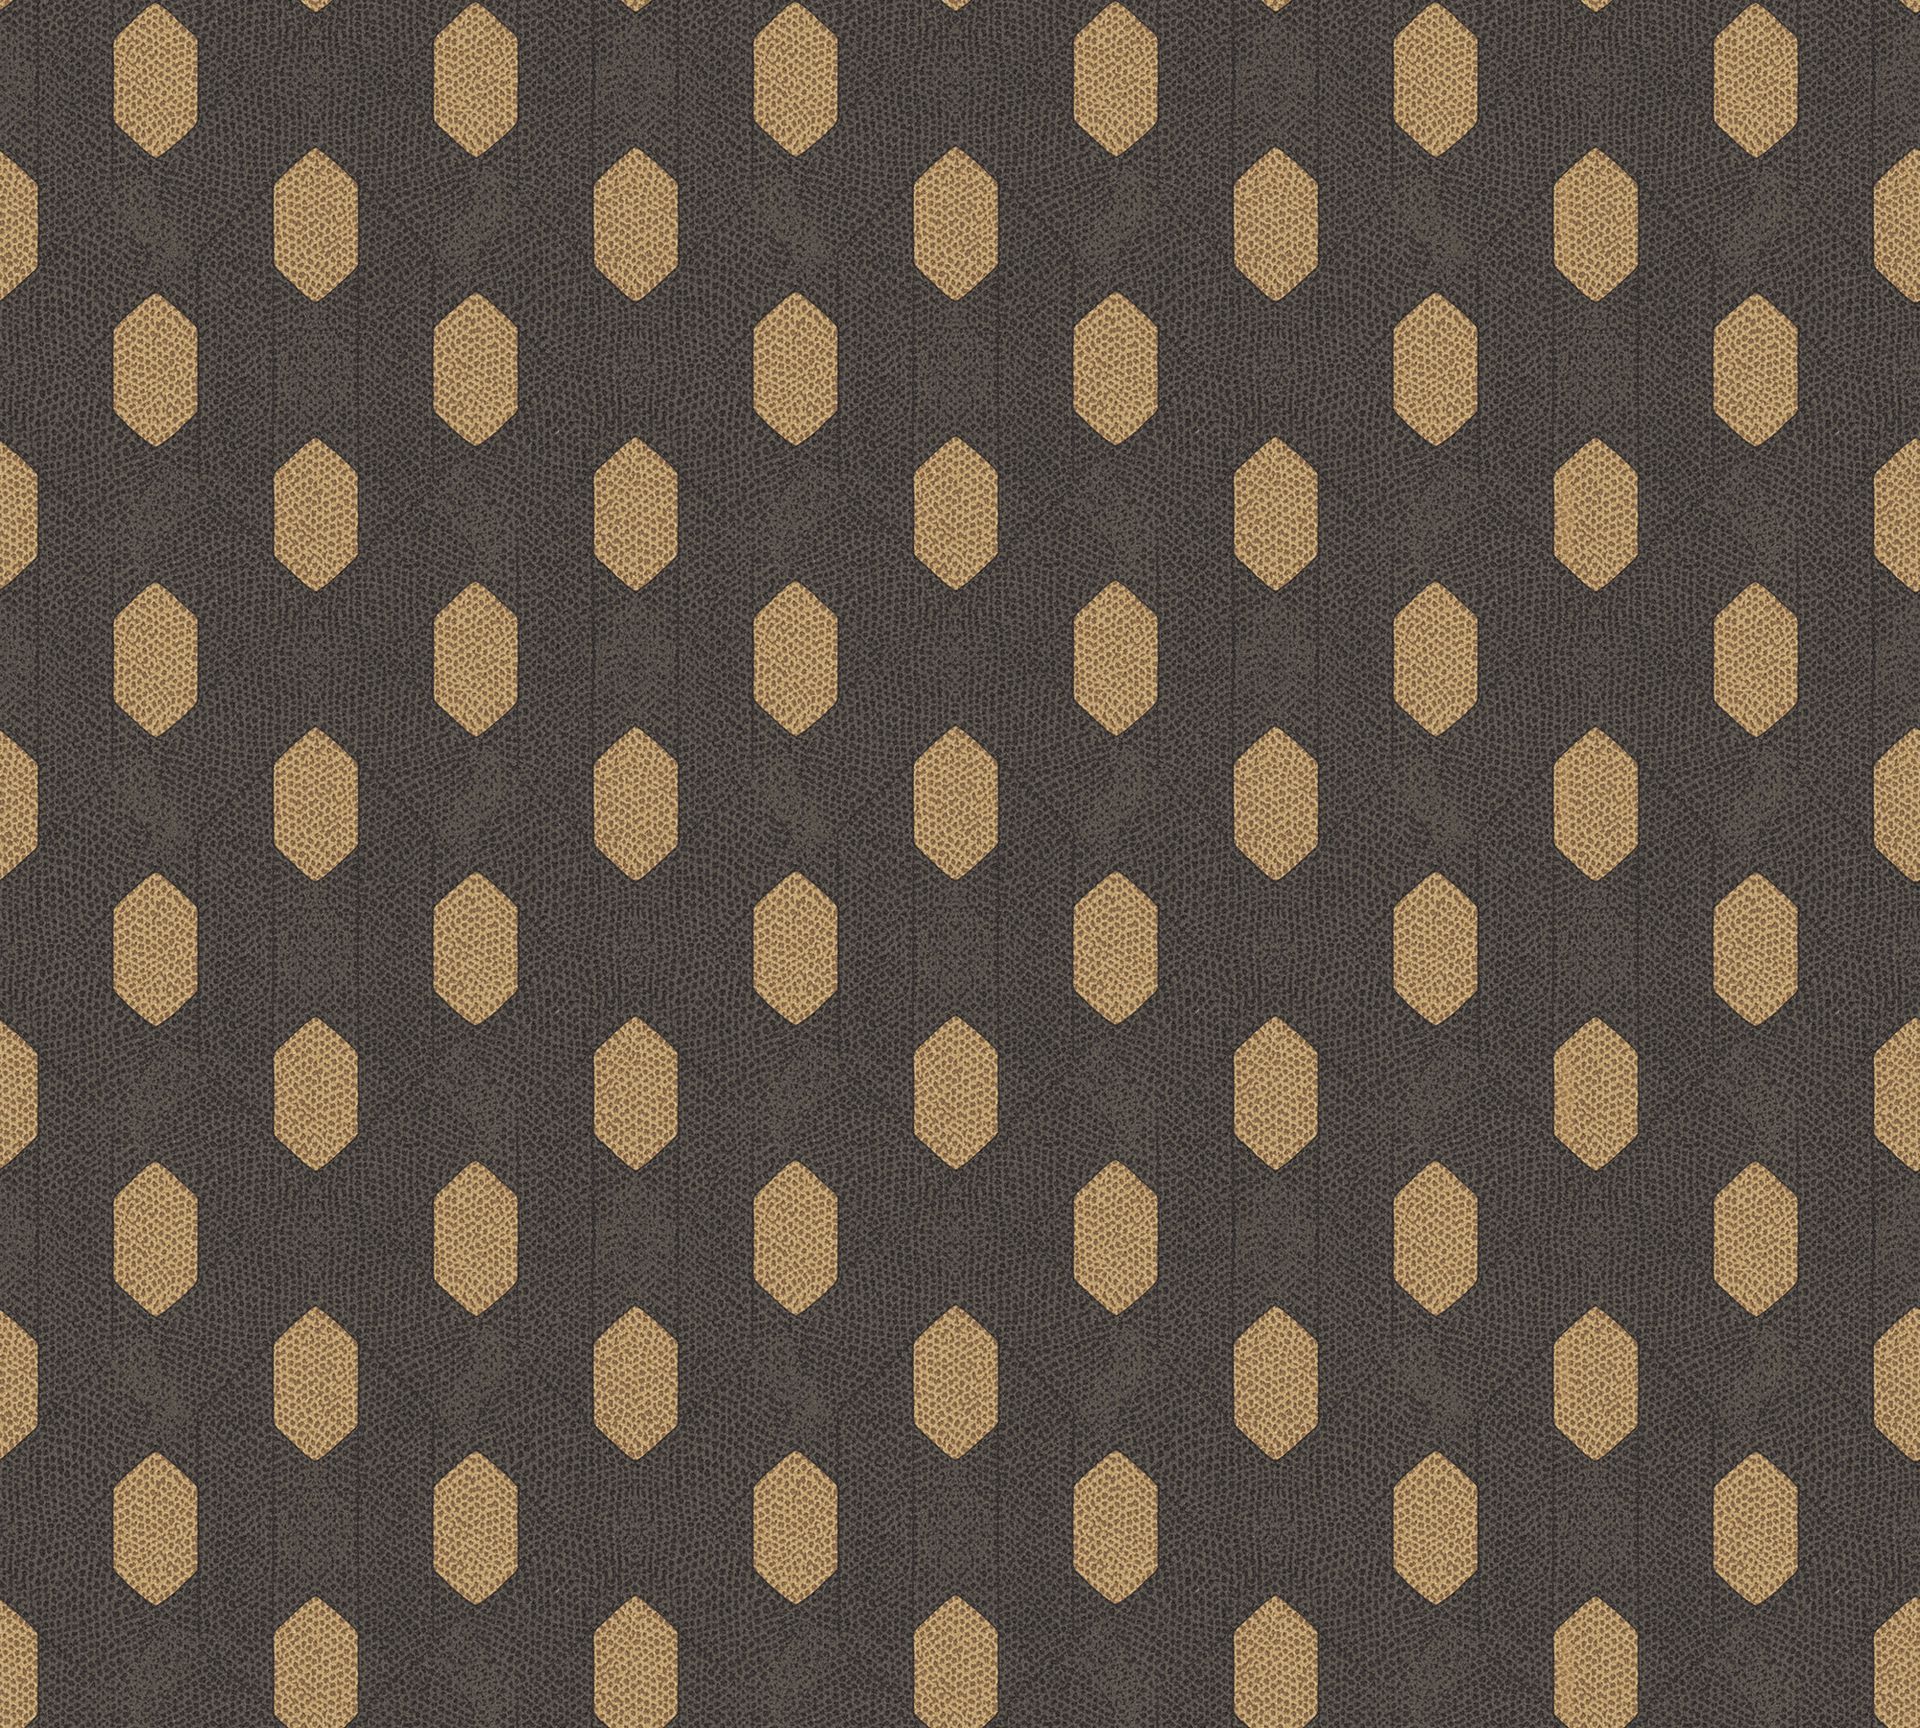 Architects Paper Absolutely Chic, Vintagetapete, schwarz, gold 369735